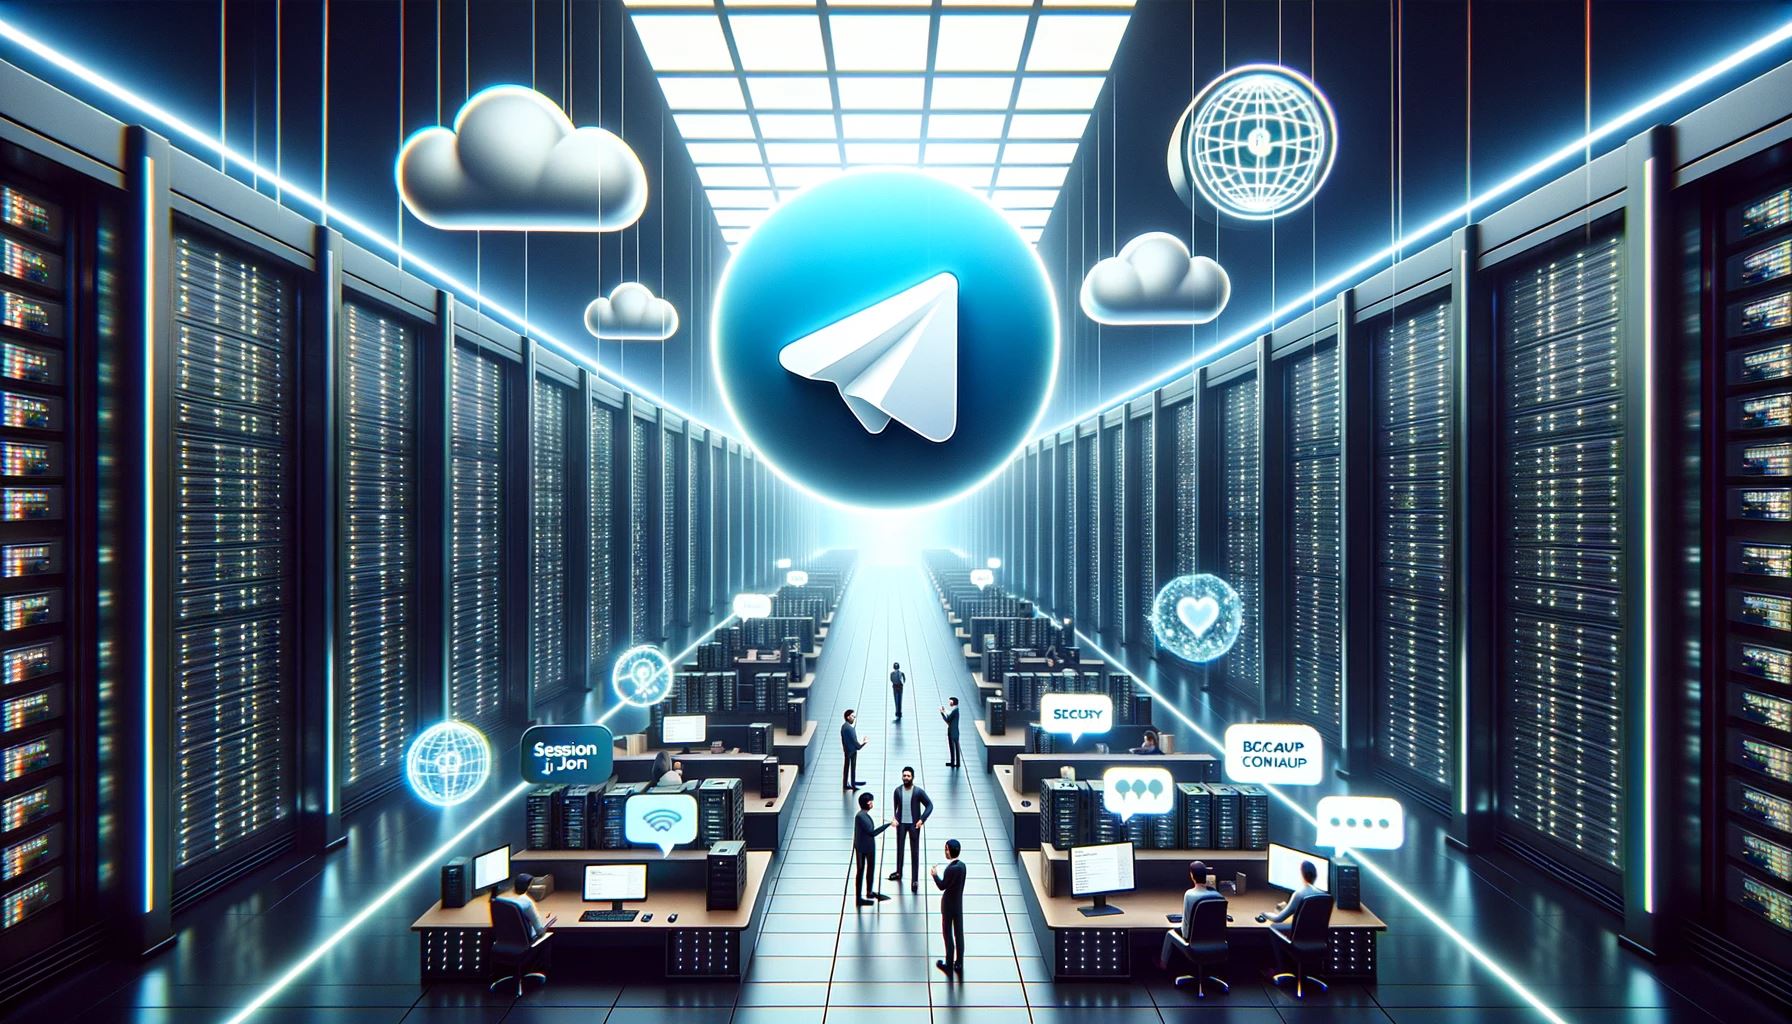 How and where to buy Accounts for Telegram Prime